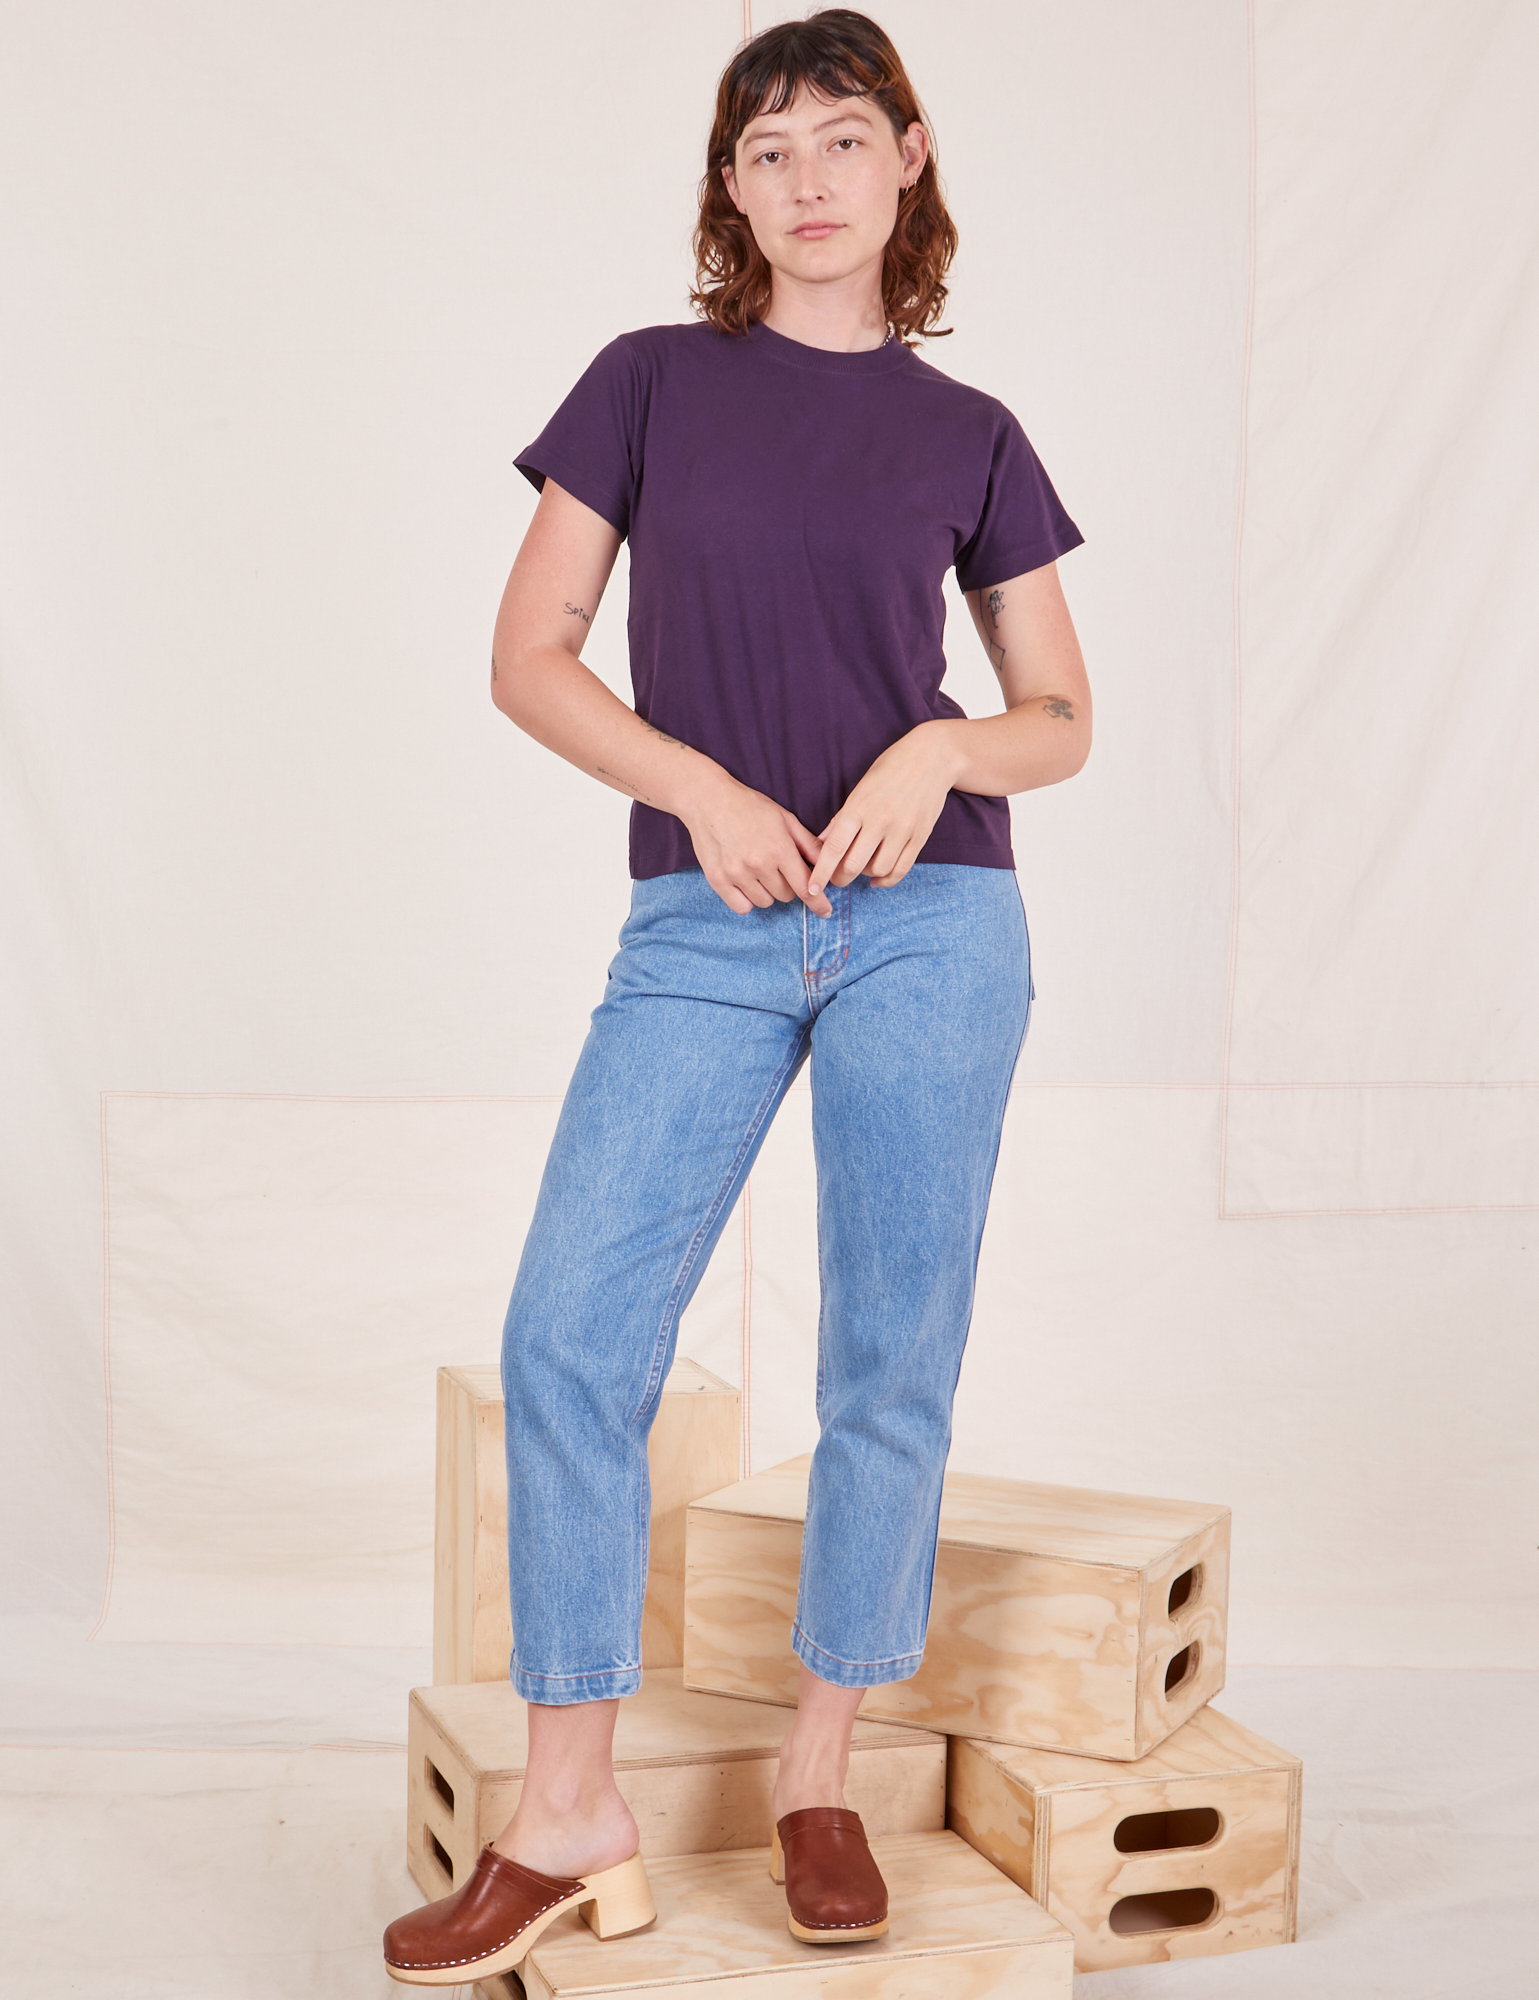 Alex is wearing The Organic Vintage Tee in Nebula Purple and light wash Frontier Jeans